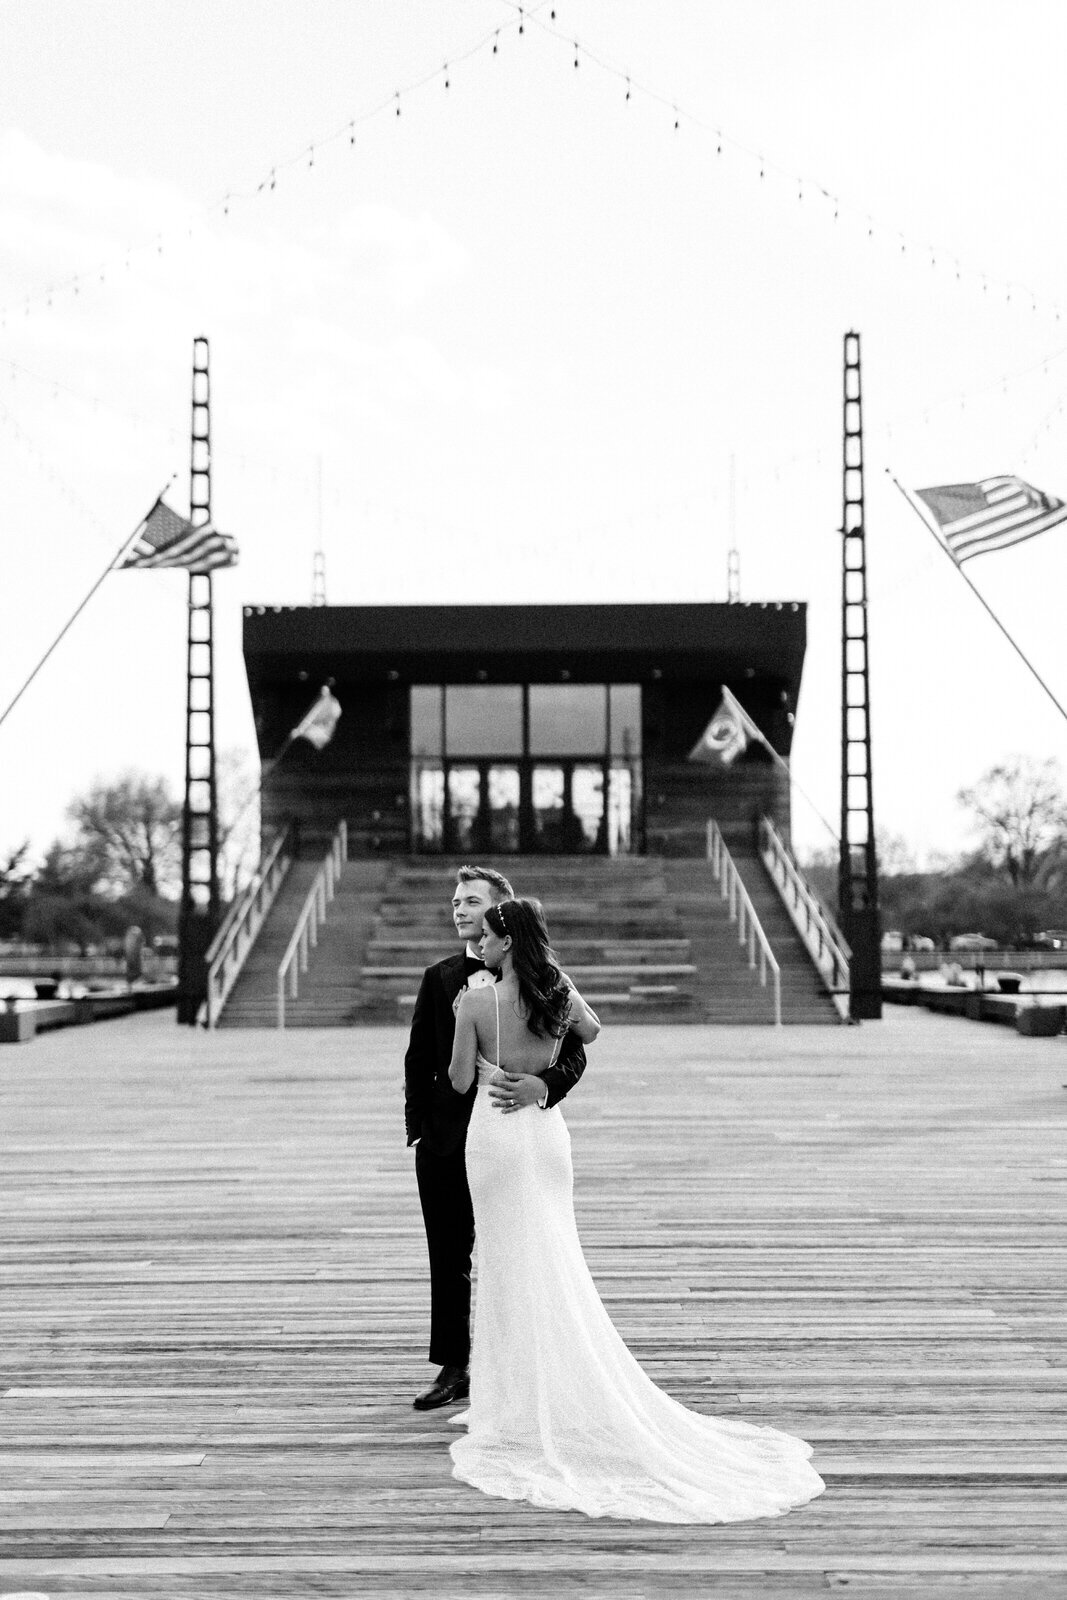 Edgy Wedding Photography at The Wharf in DC 2